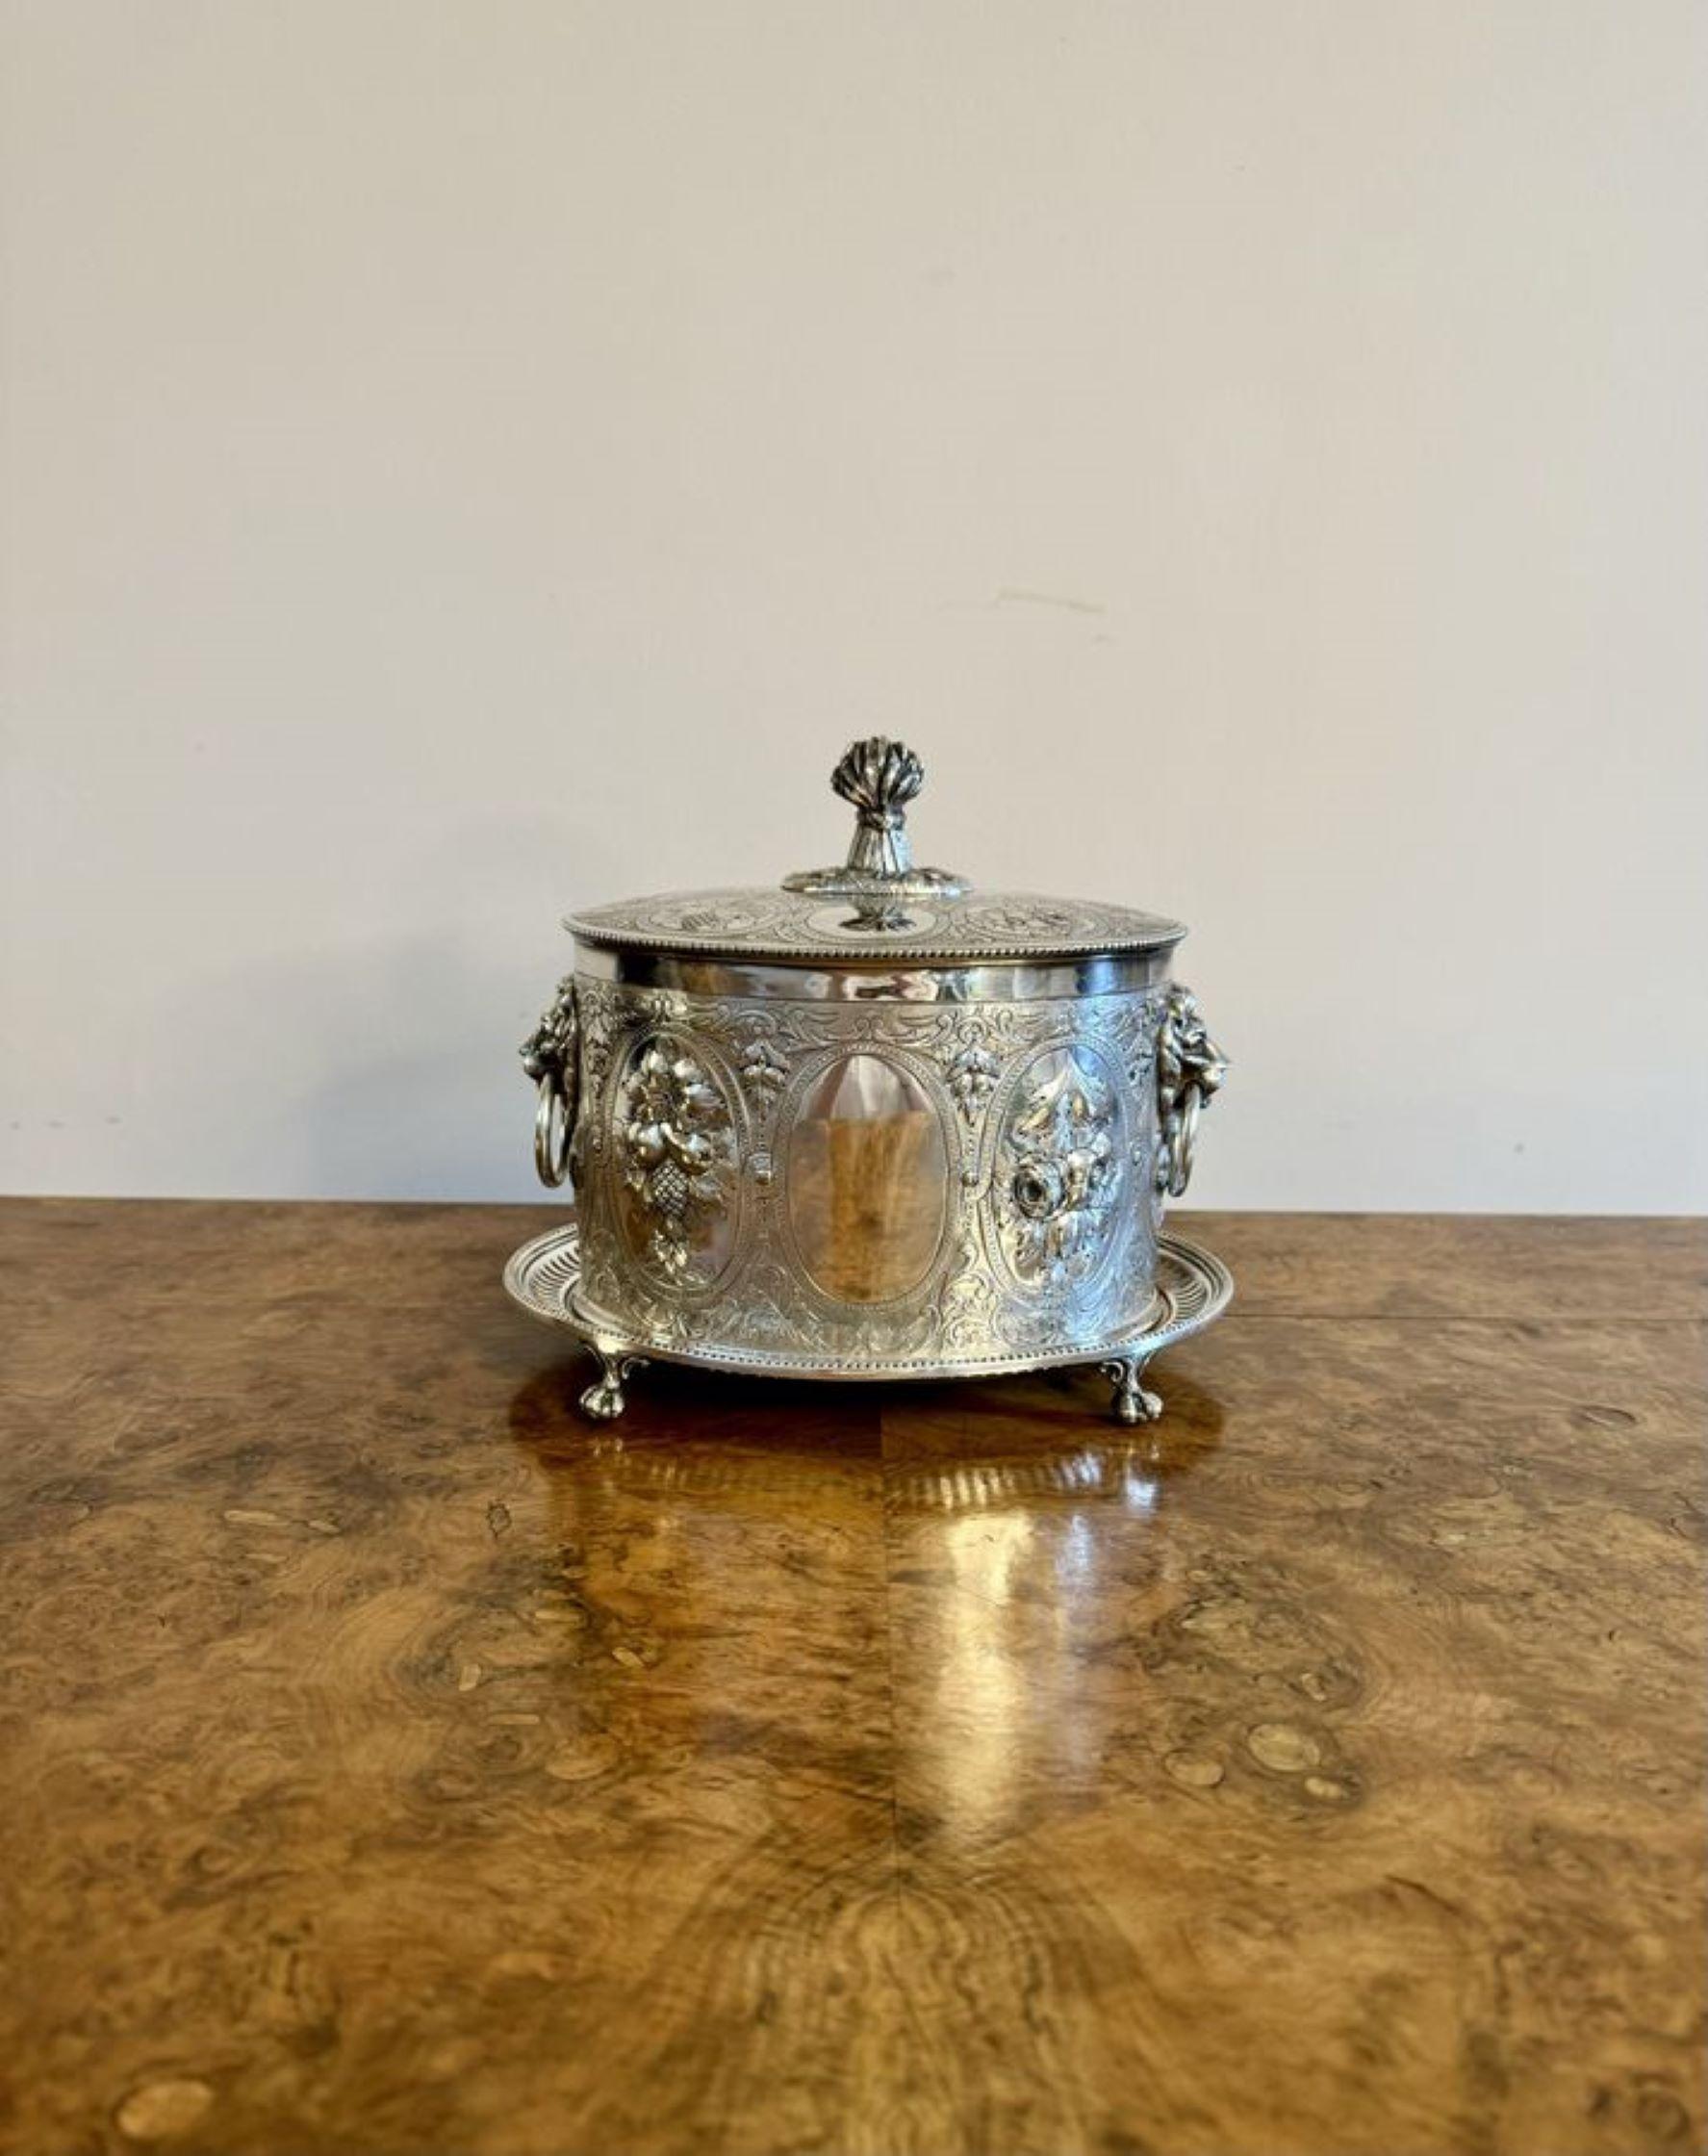 Outstanding quality antique Edwardian ornate silver plated biscuit barrel having a fantastic quality antique Edwardian silver plated biscuit barrel with quality ornate detail throughout, decorated with scrolls, flowers and fruit, having a lift up